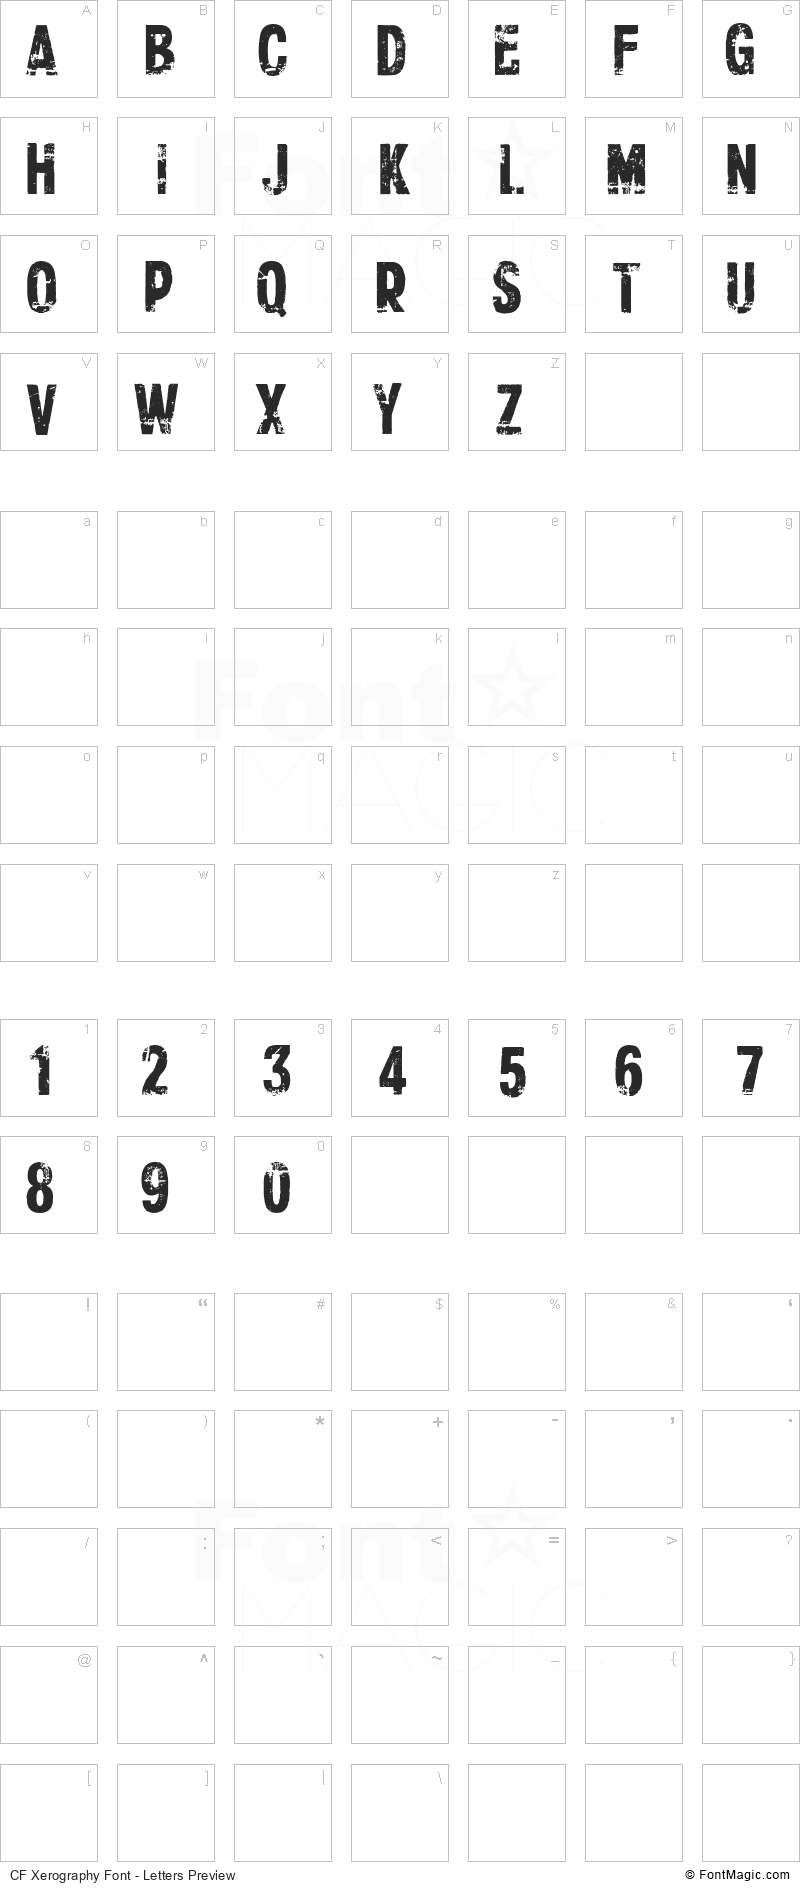 CF Xerography Font - All Latters Preview Chart